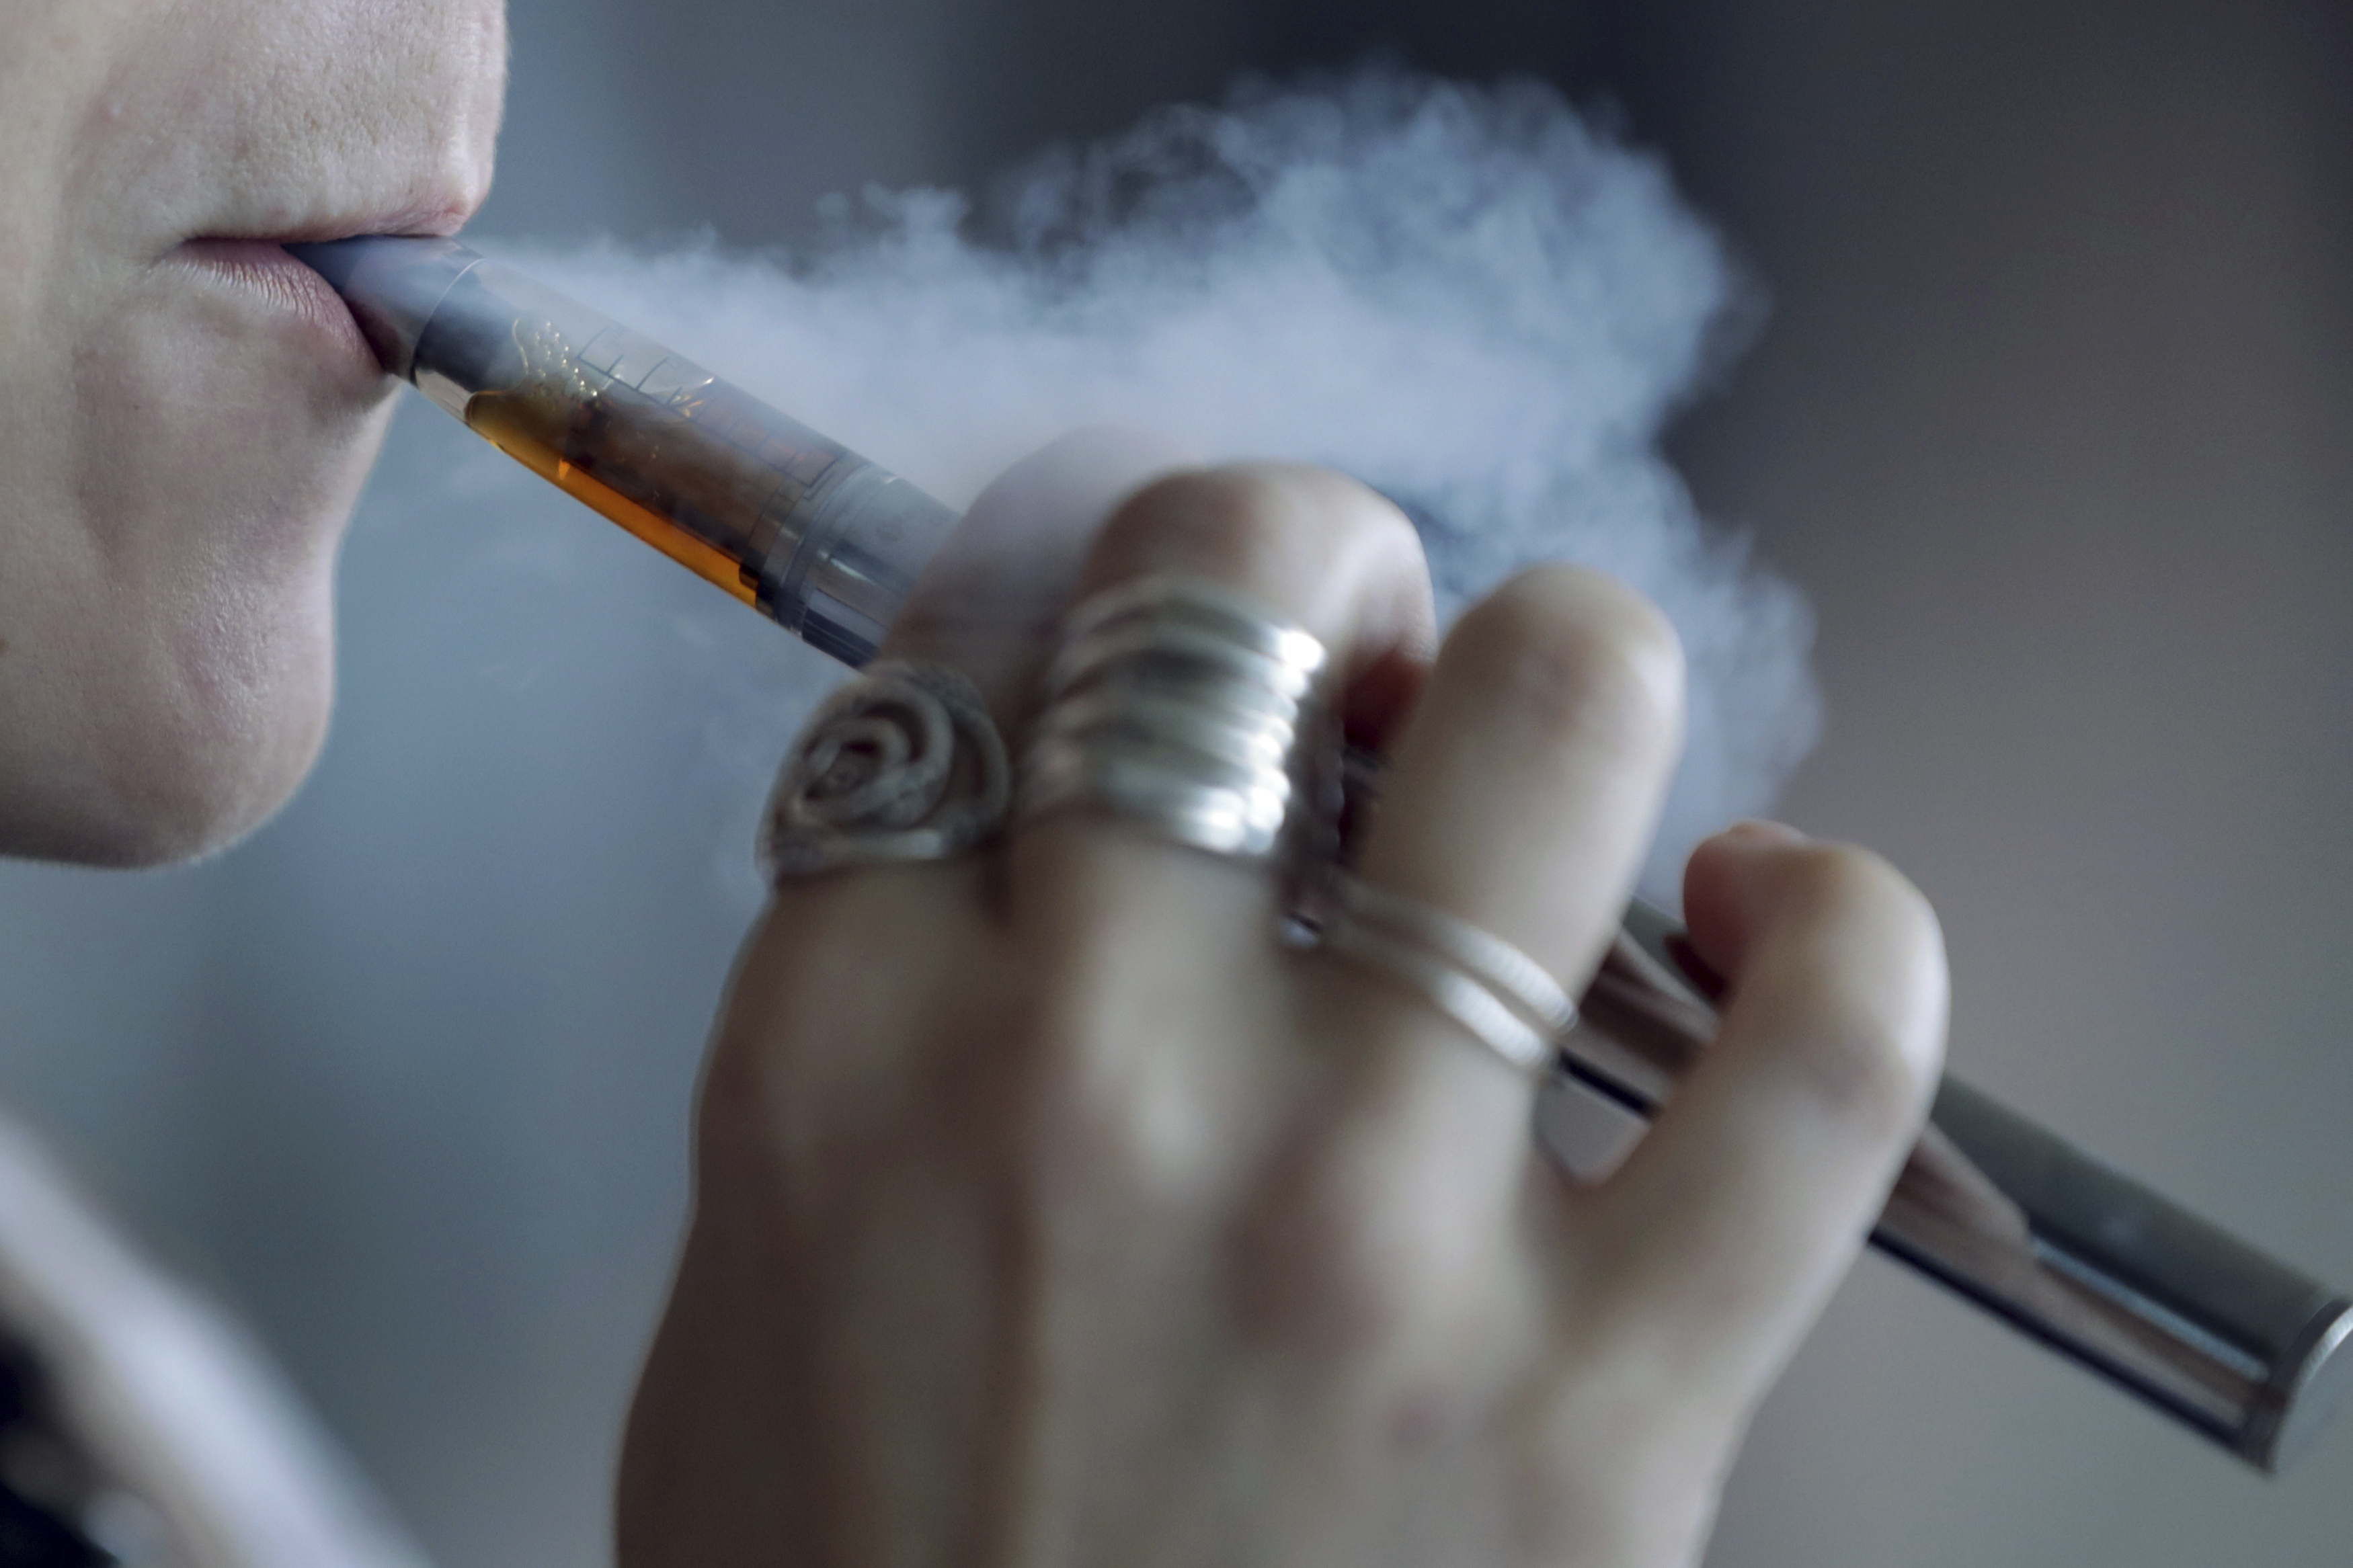 Time to ban flavoured vapes, WHO says, urging tobacco-style controls